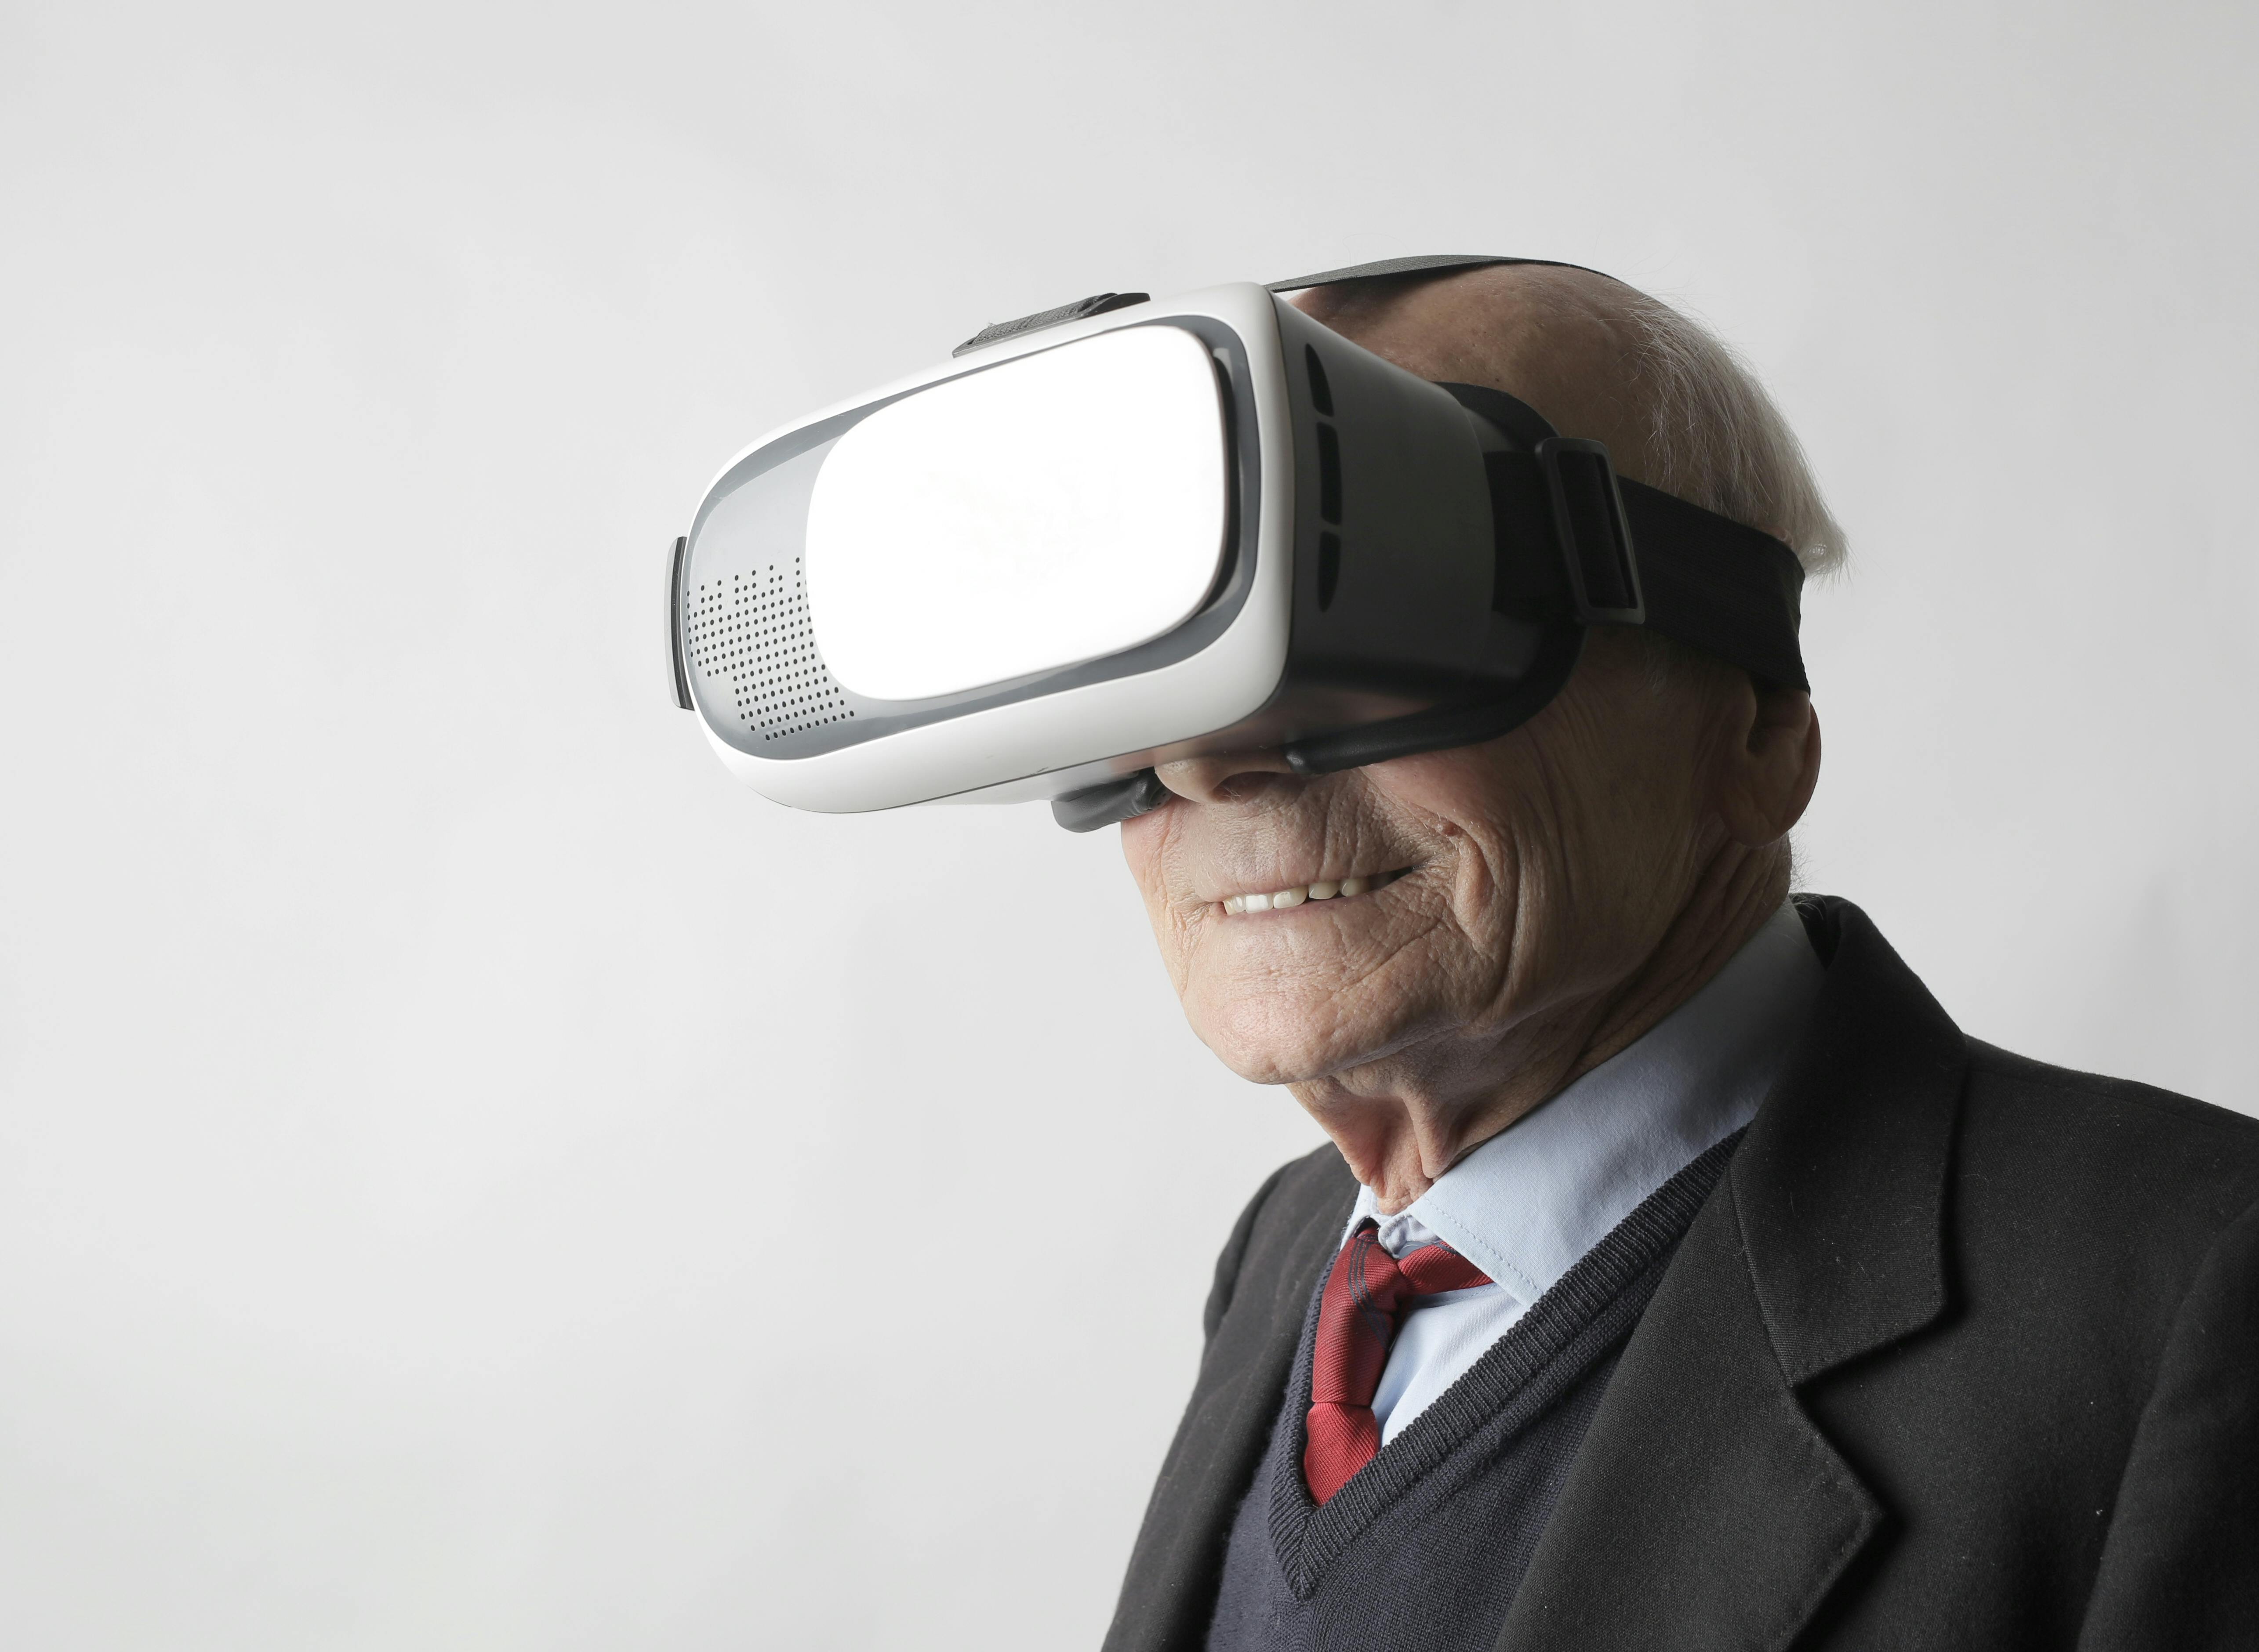 Smiling elderly gentleman wearing classy suit experiencing virtual reality while using modern headset on white background